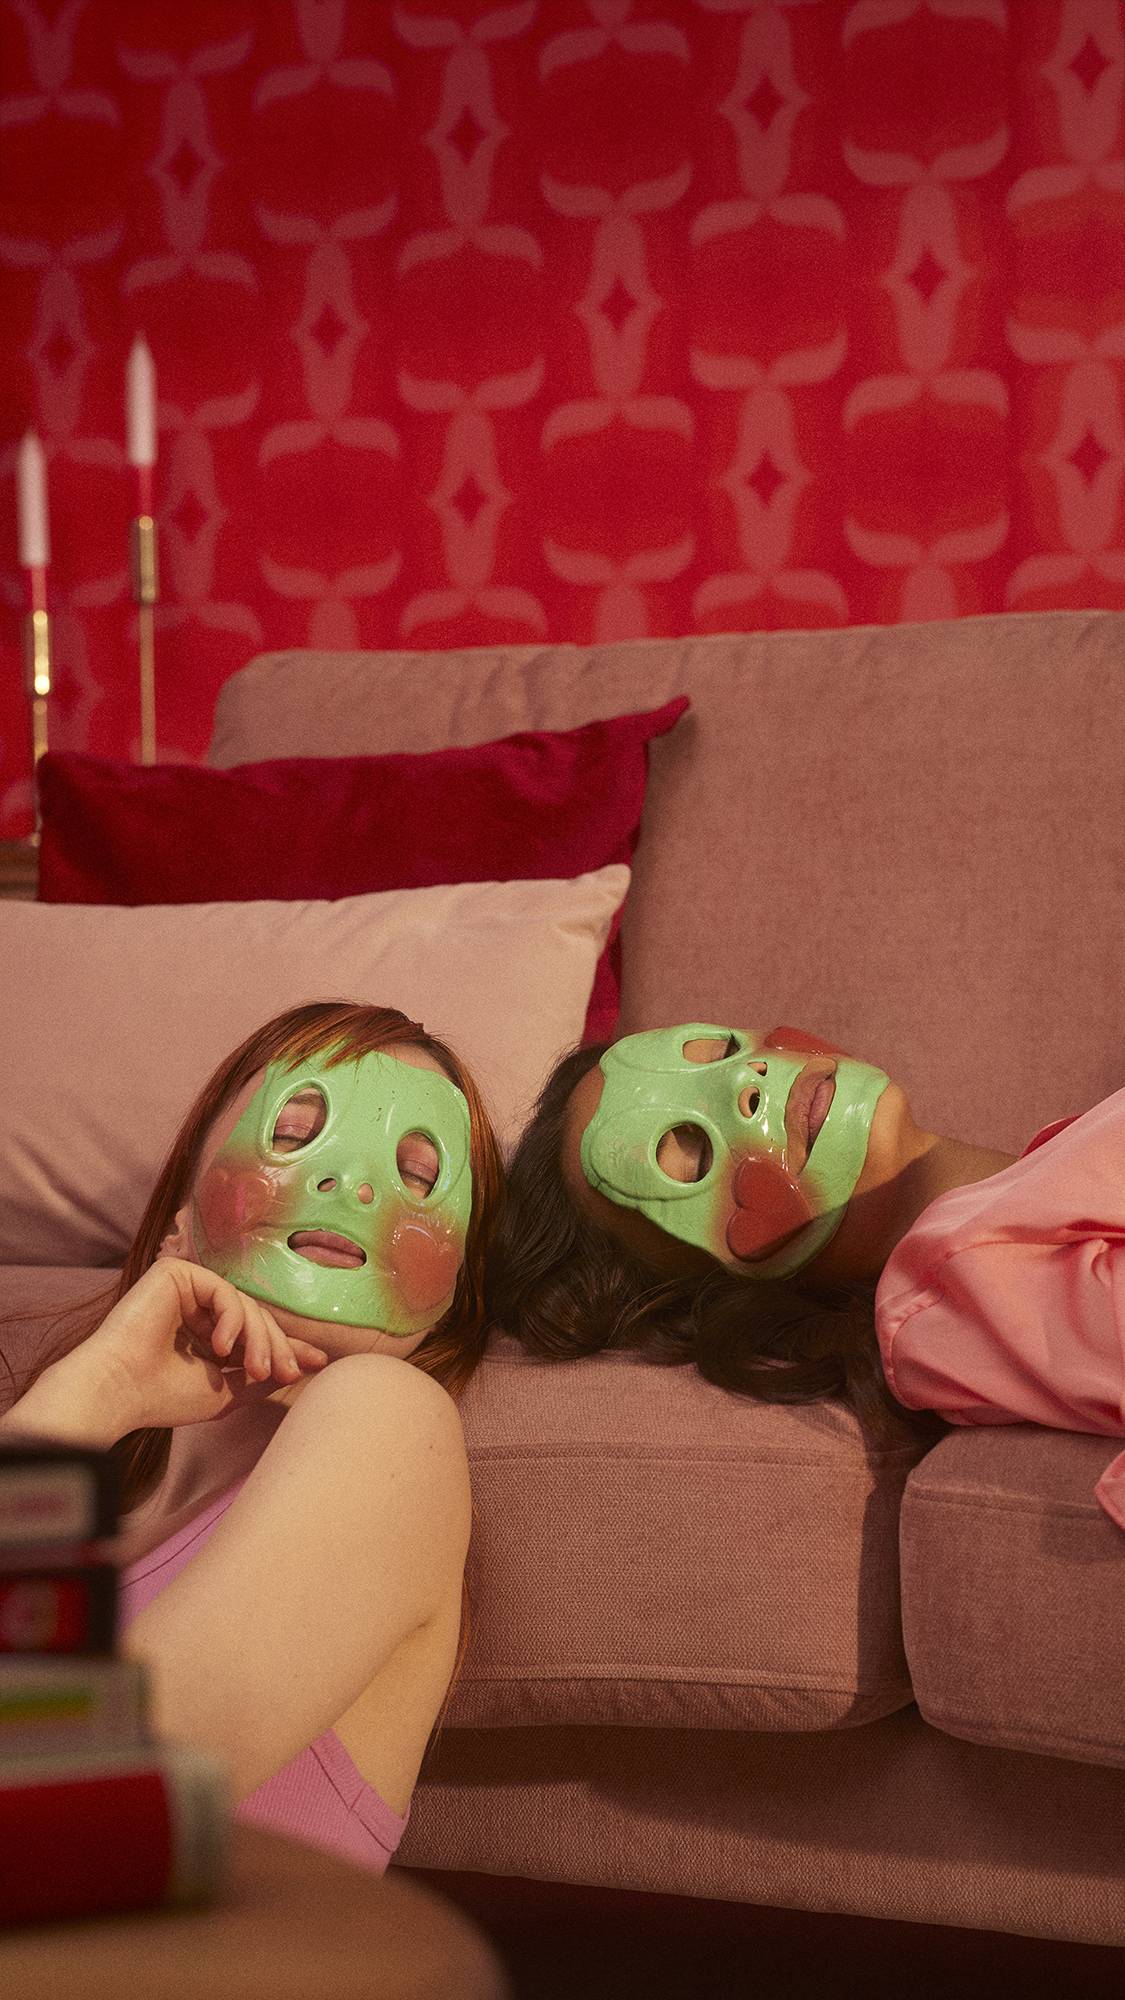 Two models are in a red room lying against a comfy sofa. They are both wearing the Prince Charming face mask. 